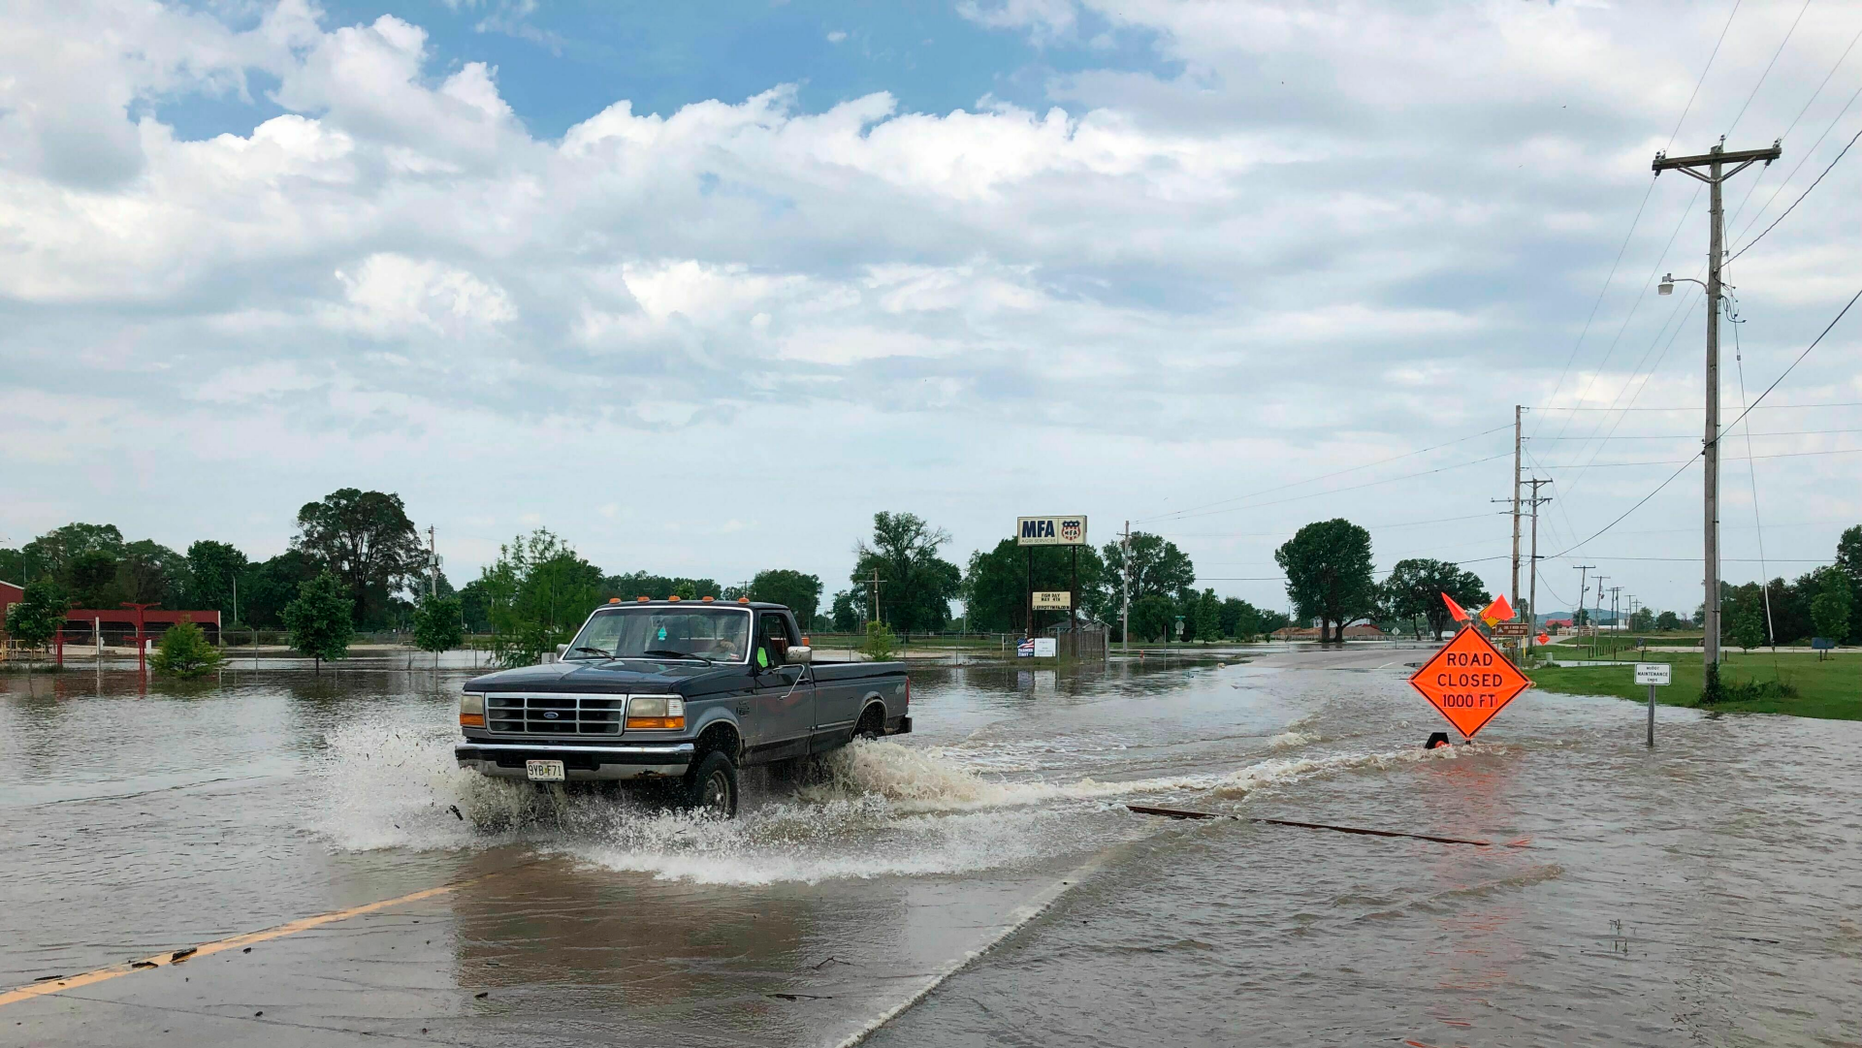 A pickup truck evacuates from an area north of Jefferson City, Missouri, while the waters of the Missouri River rise on the road on Friday, May 24, 2019. Floods occur as residents still clean up a powerful tornado who hit the state capital May 22nd. (AP Photo / David A. Lieb)